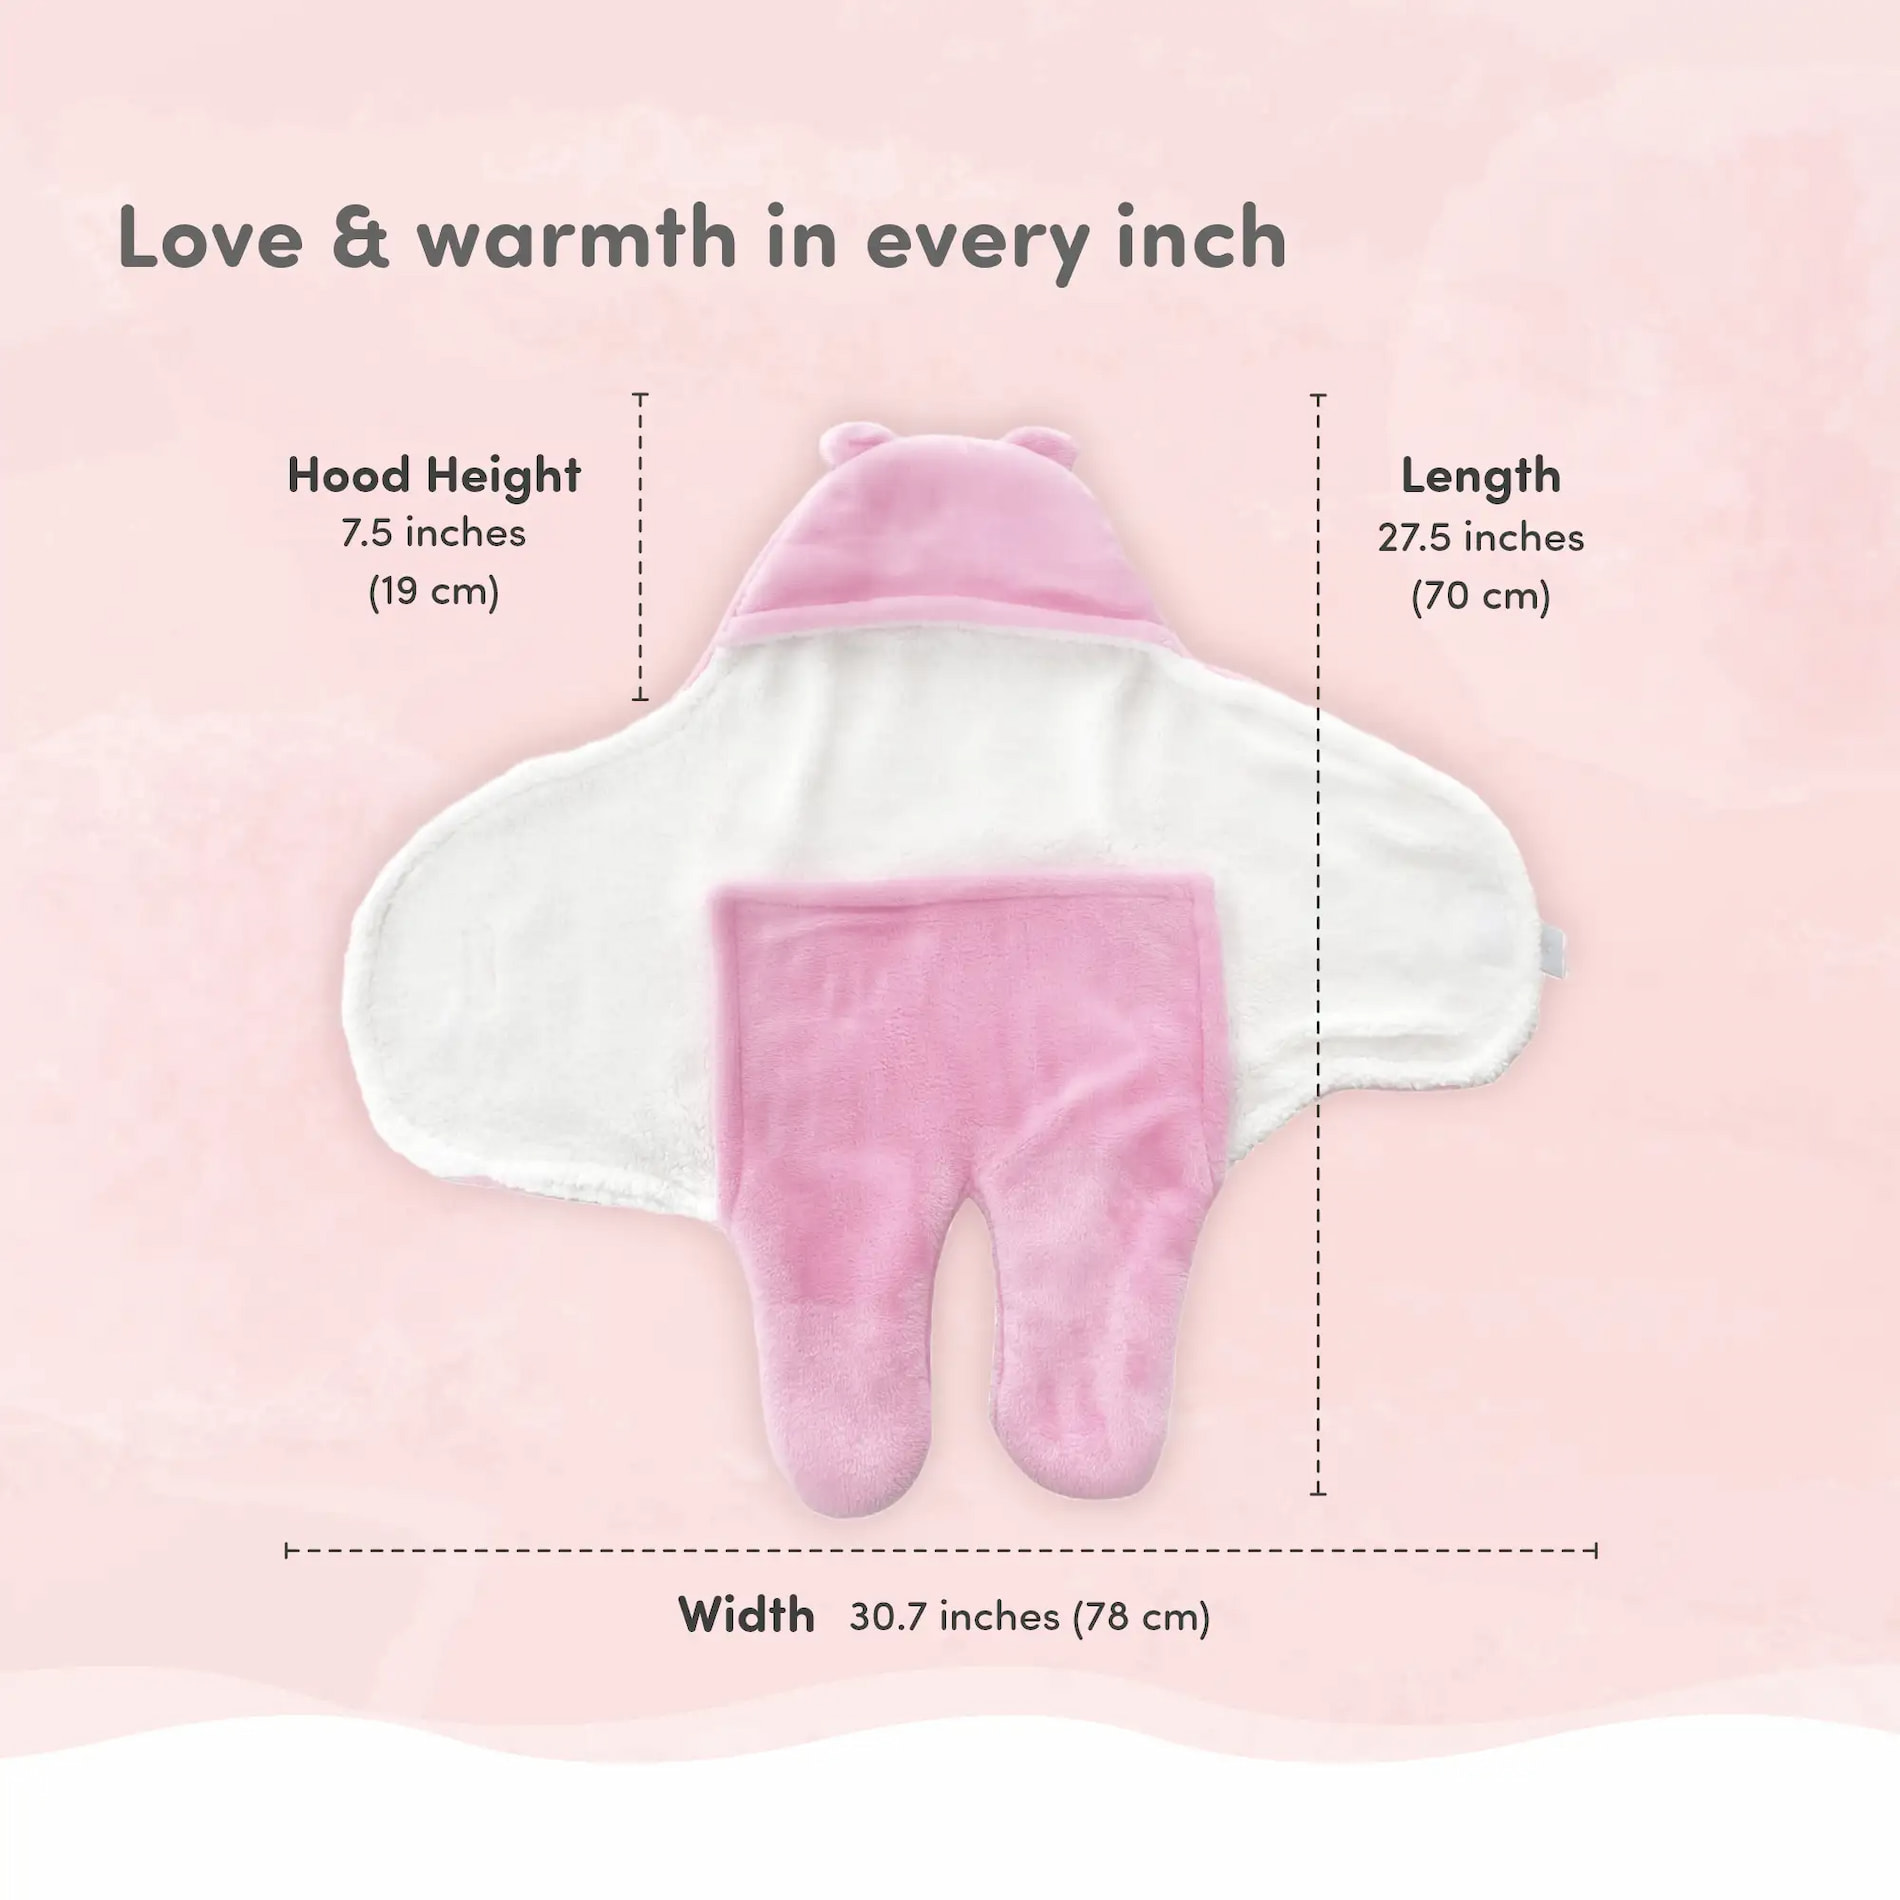 Baby Wrapper for New Born | Baby Swaddling Wrapper | 4-in-1 All Season AC Blanket cum Sleeping Bag for Baby 0-6 Months - Light Pink & Light Brown